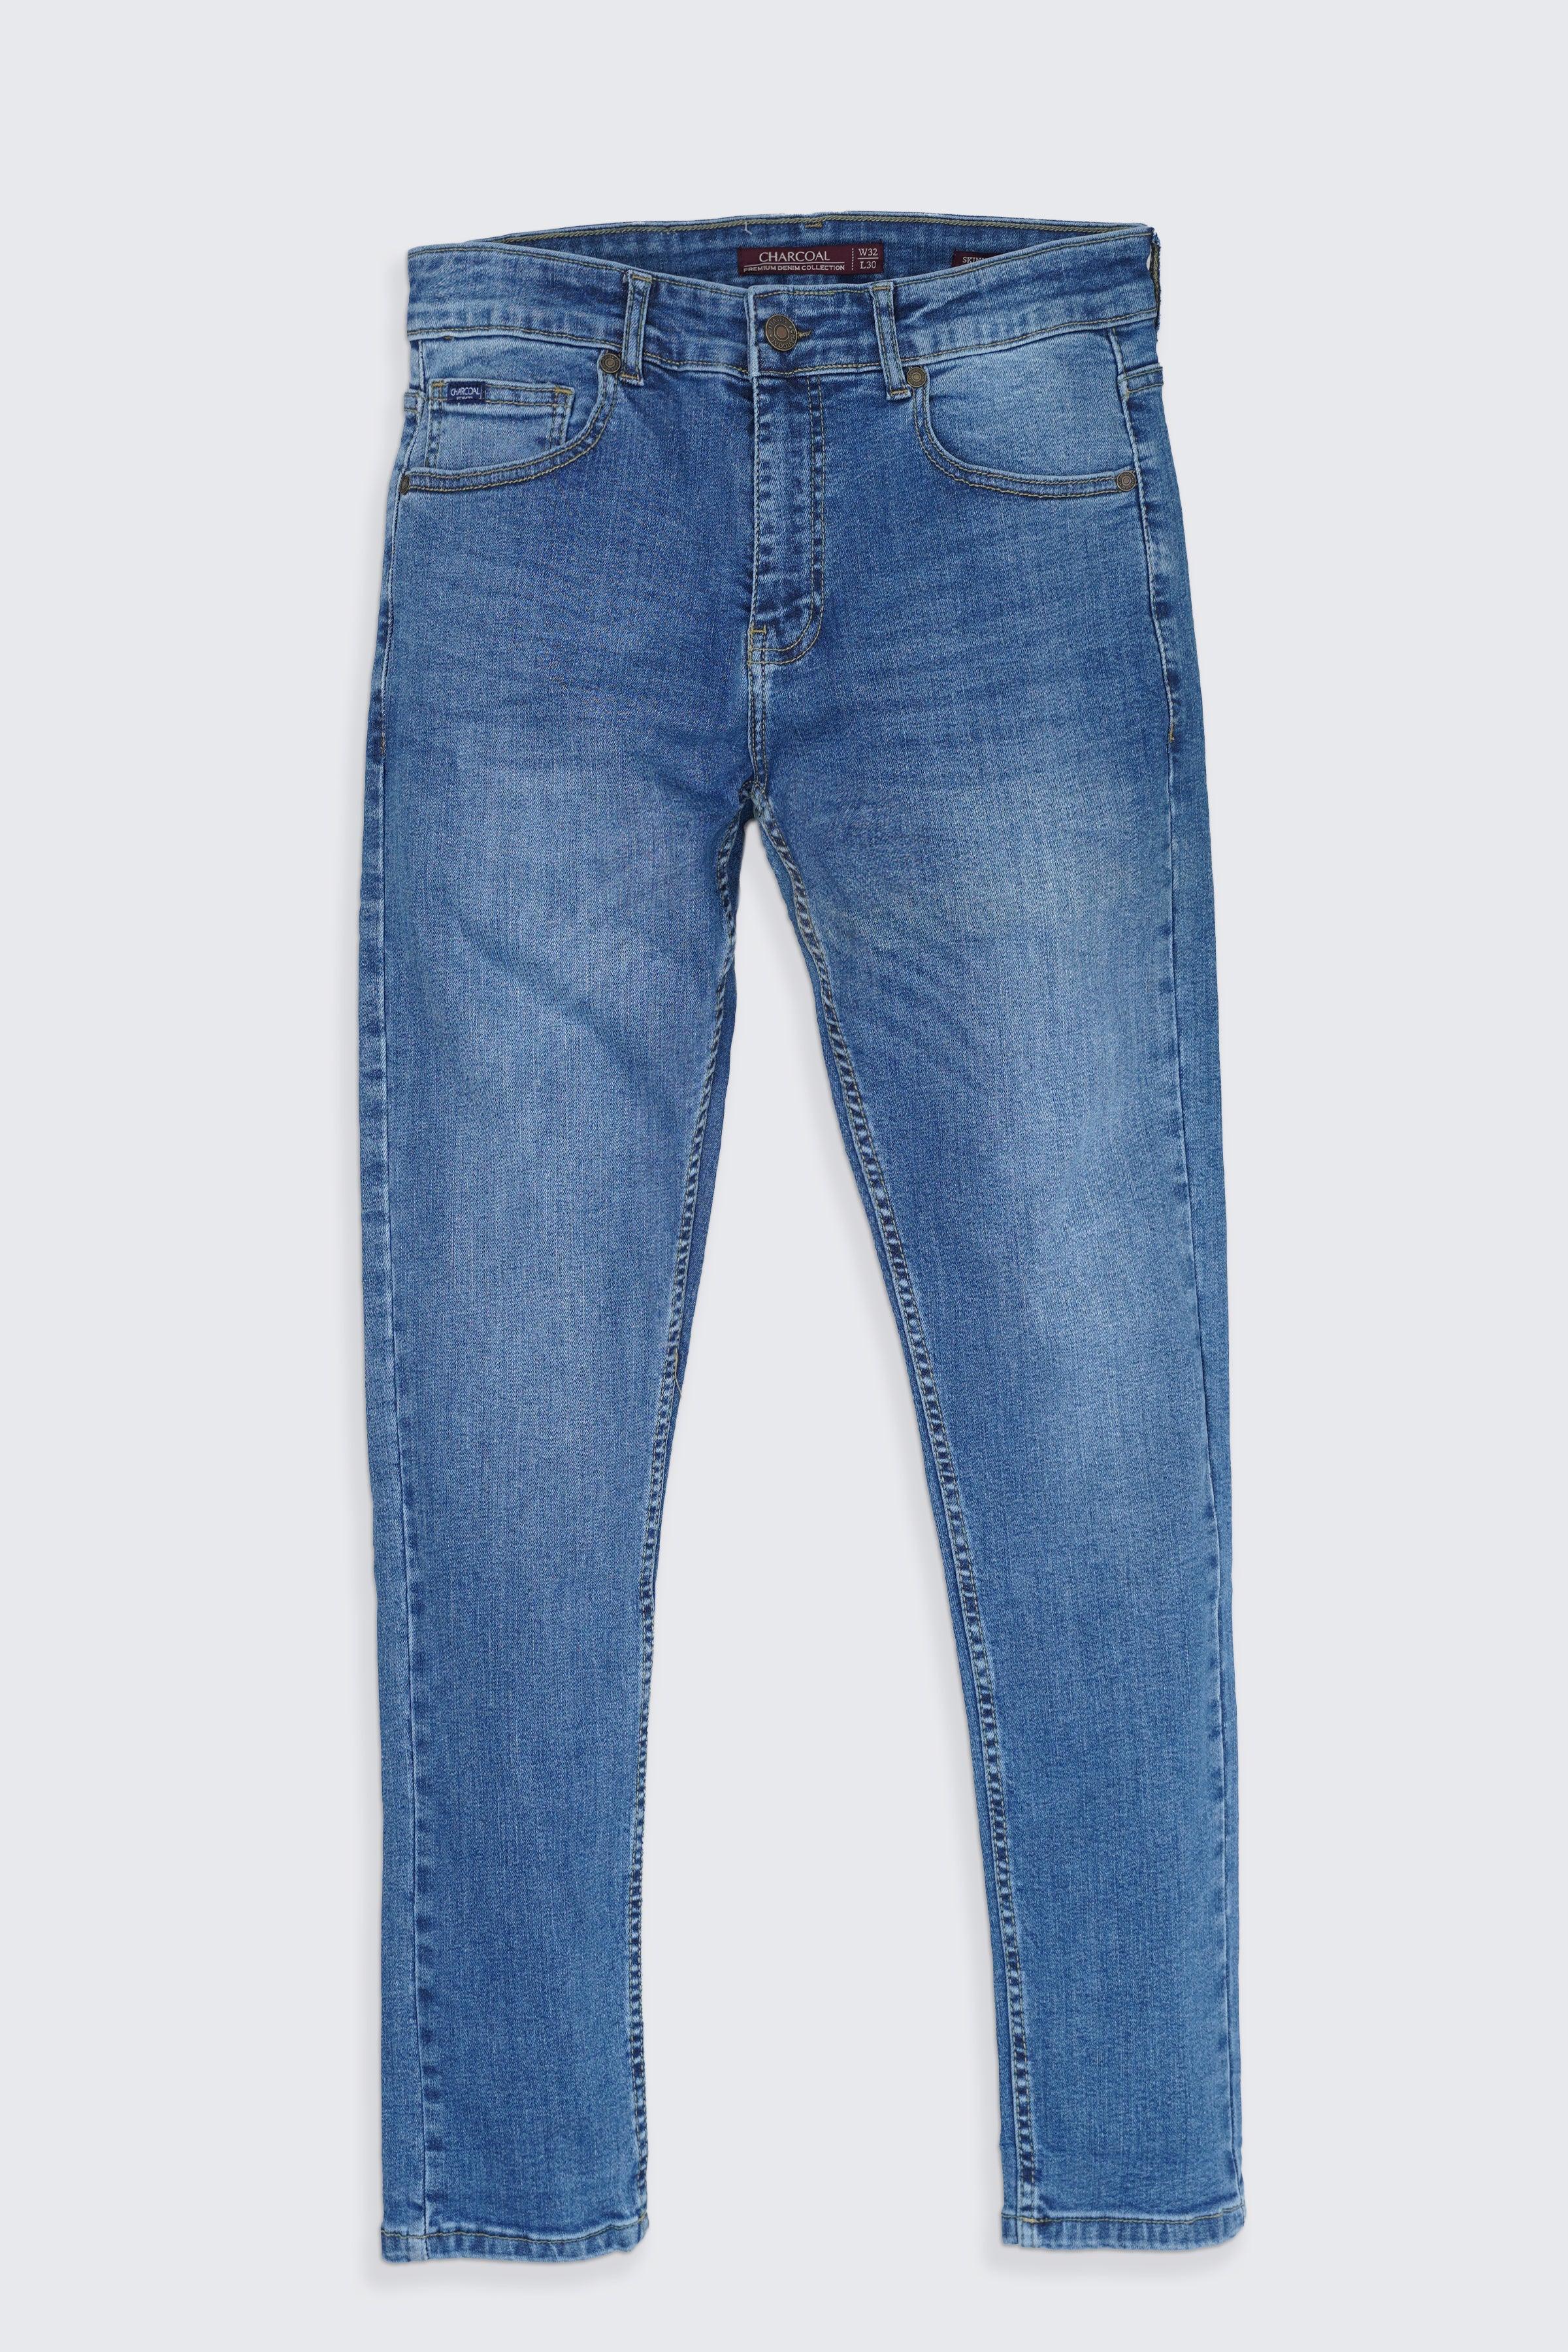 SKINNY LEG JEANS MID BLUE at Charcoal Clothing